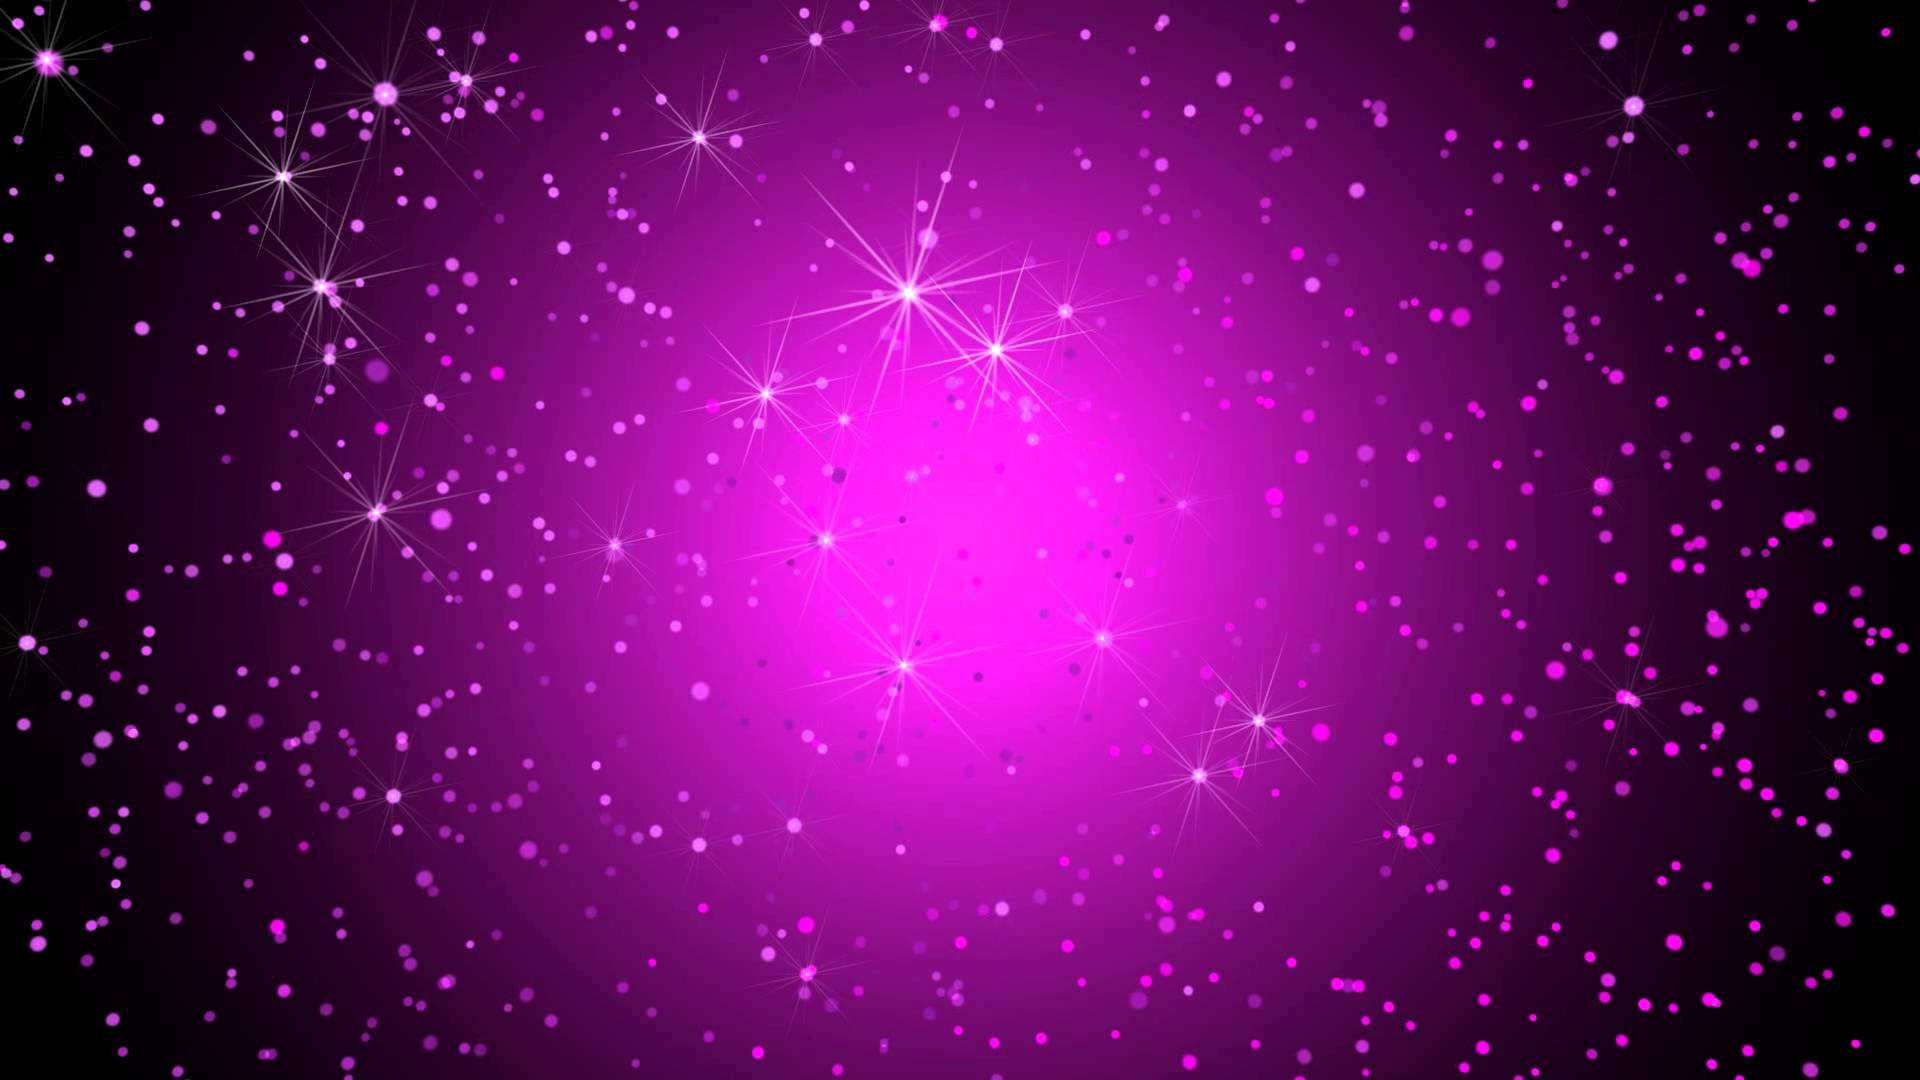 Wallpaper For > Sparkly Background That Move